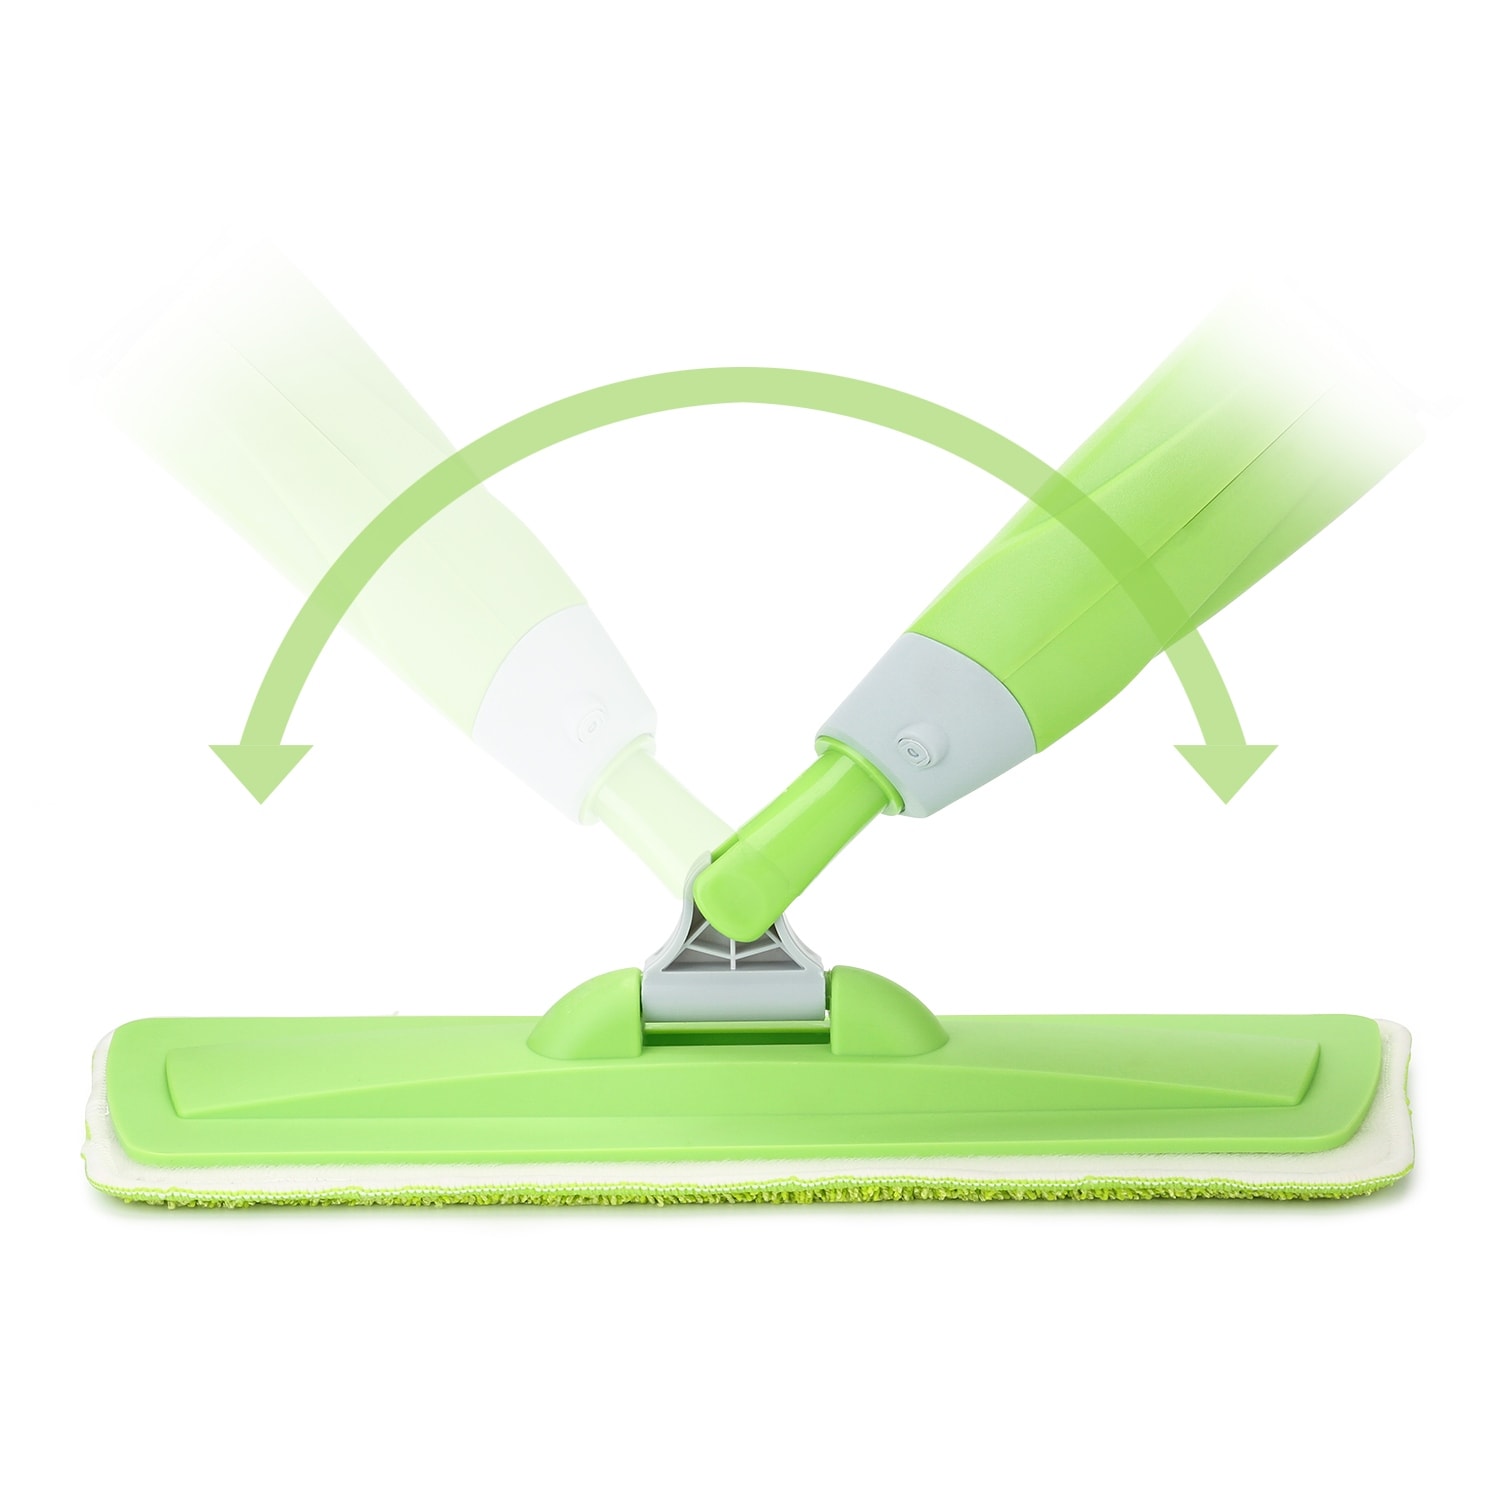 https://ak1.ostkcdn.com/images/products/is/images/direct/34cb409f6fc81a8afd0f7d95fba6a9697d156d7a/360-Degree-Microfiber-Spray-Mop-Cleaner-Wet-Hardwood-Home-Floor-Kitchen-Dust-Sweeper.jpg